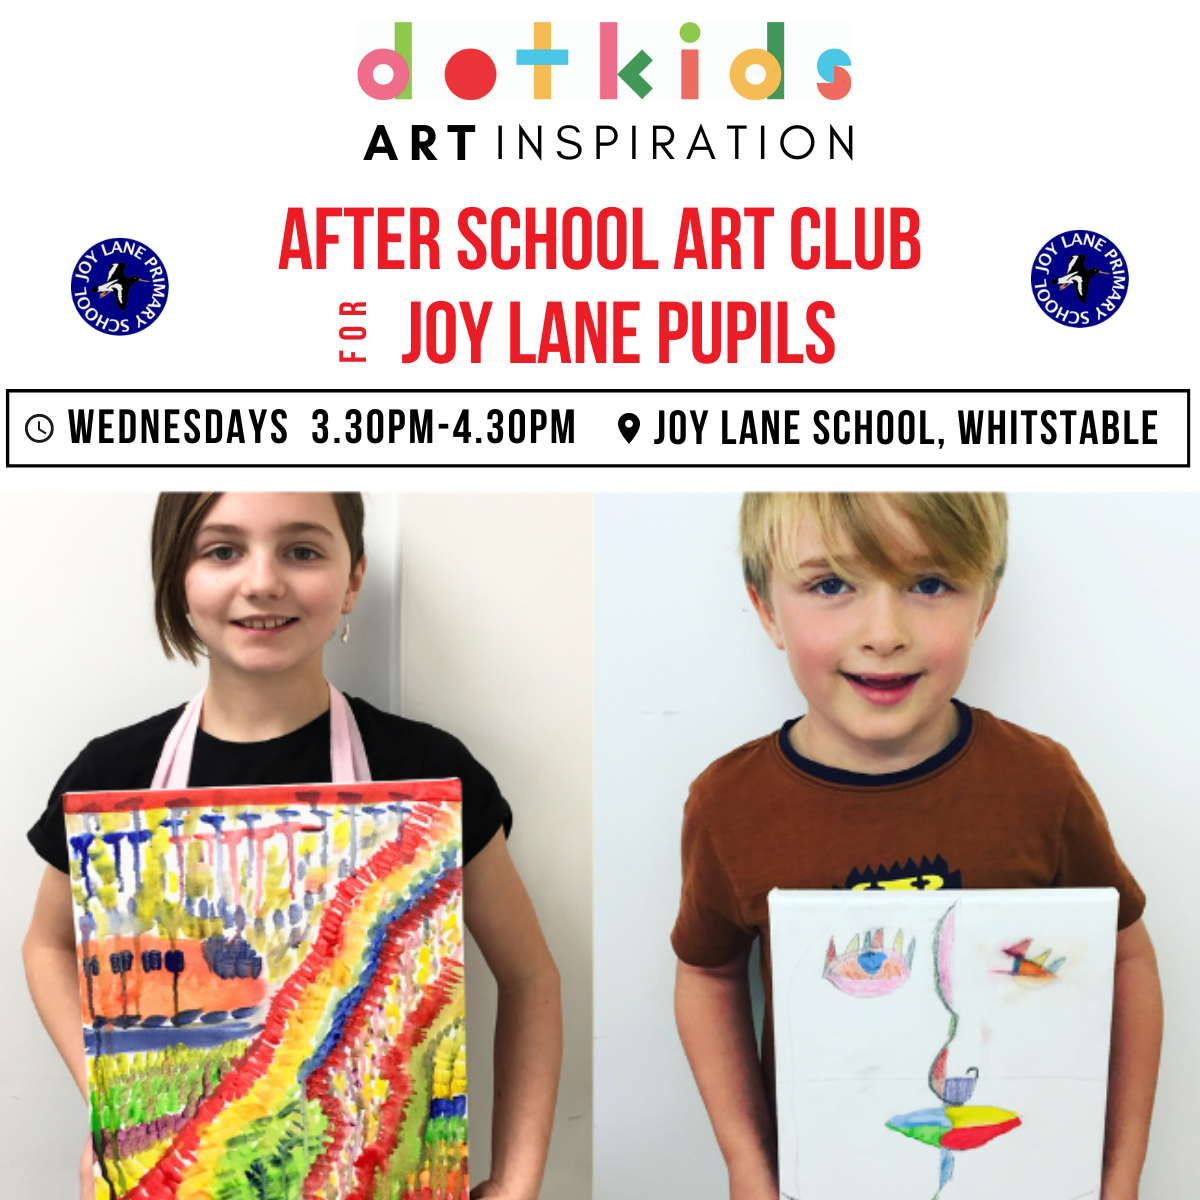 After School Art Club: For Children At Joy Lane Primary School in Whitstable